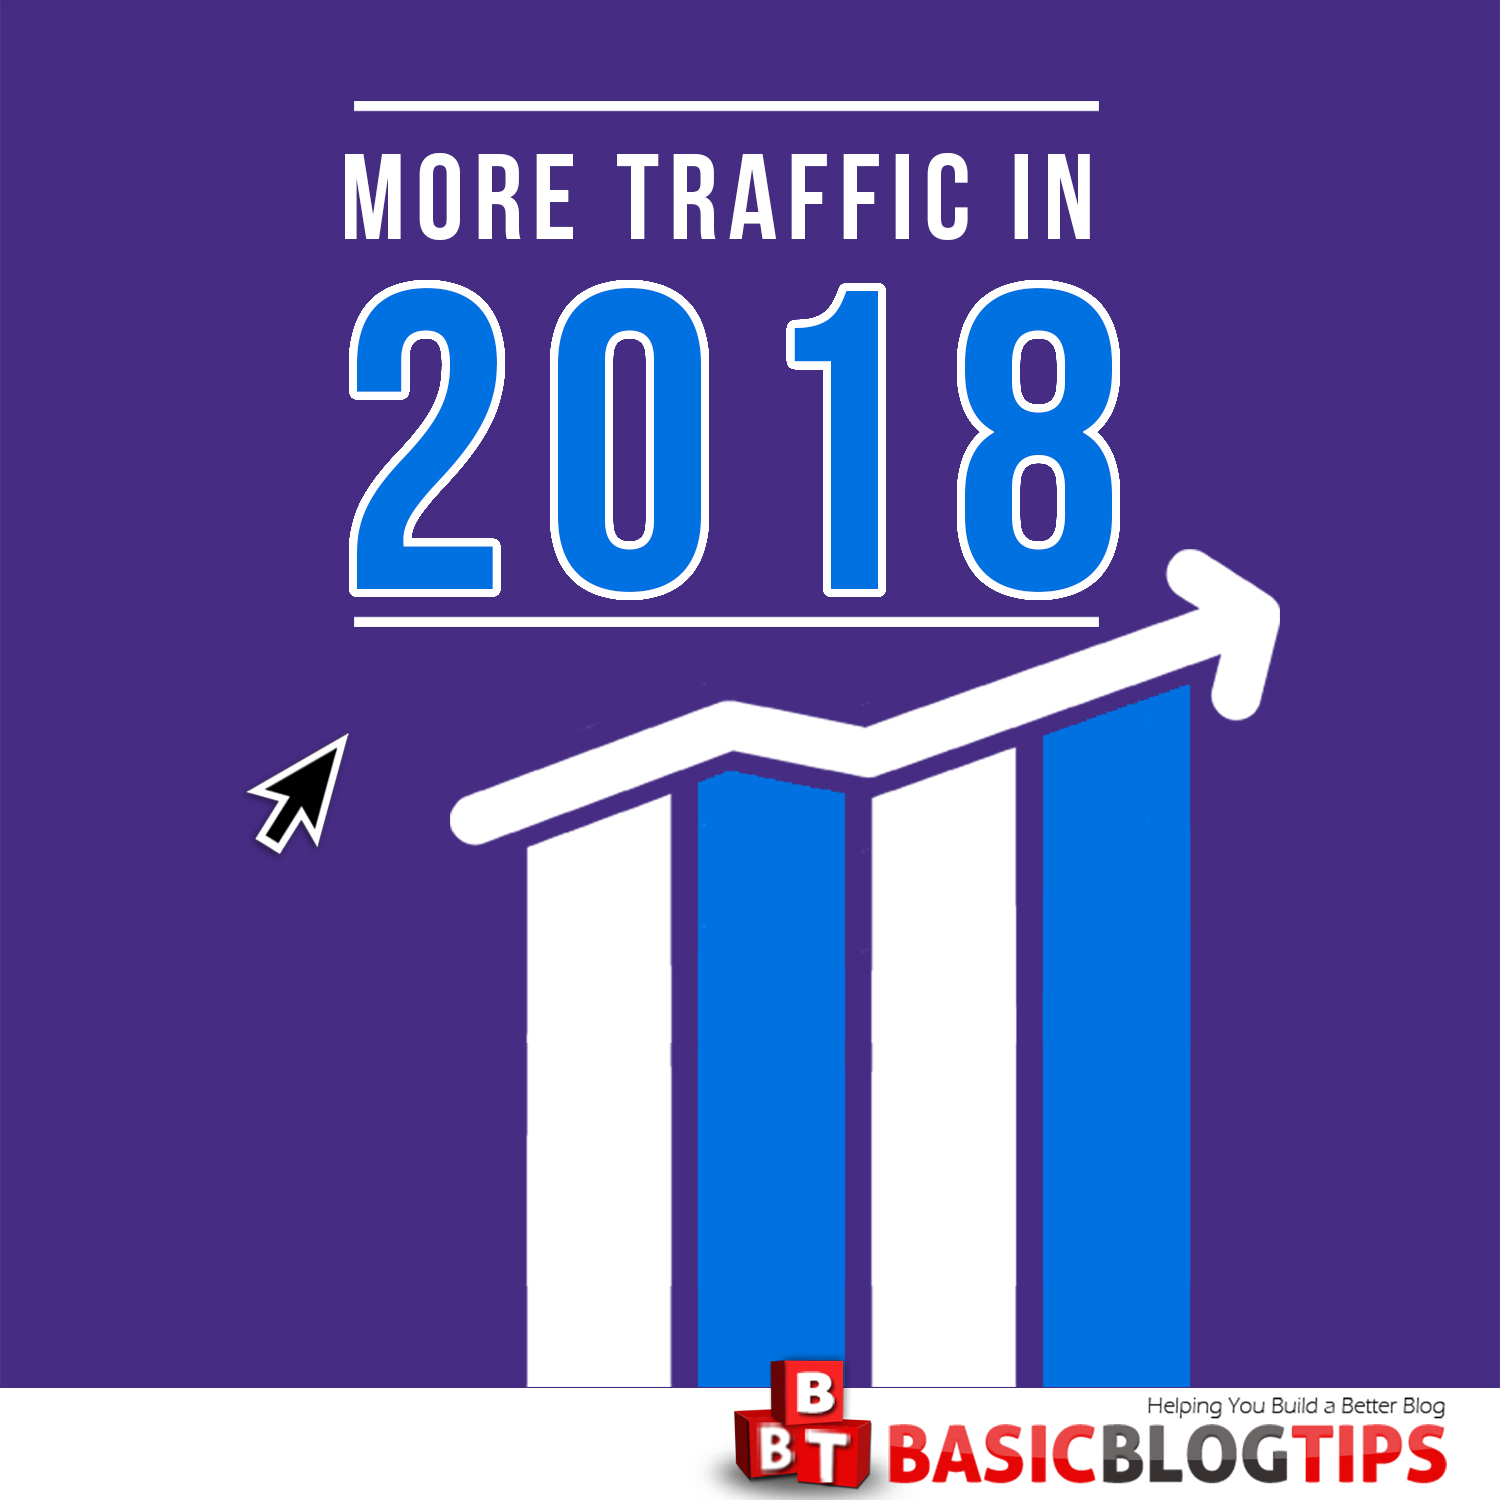 5-foolproof-ways-to-create-content-to-get-more-traffic-and-links-in-2018